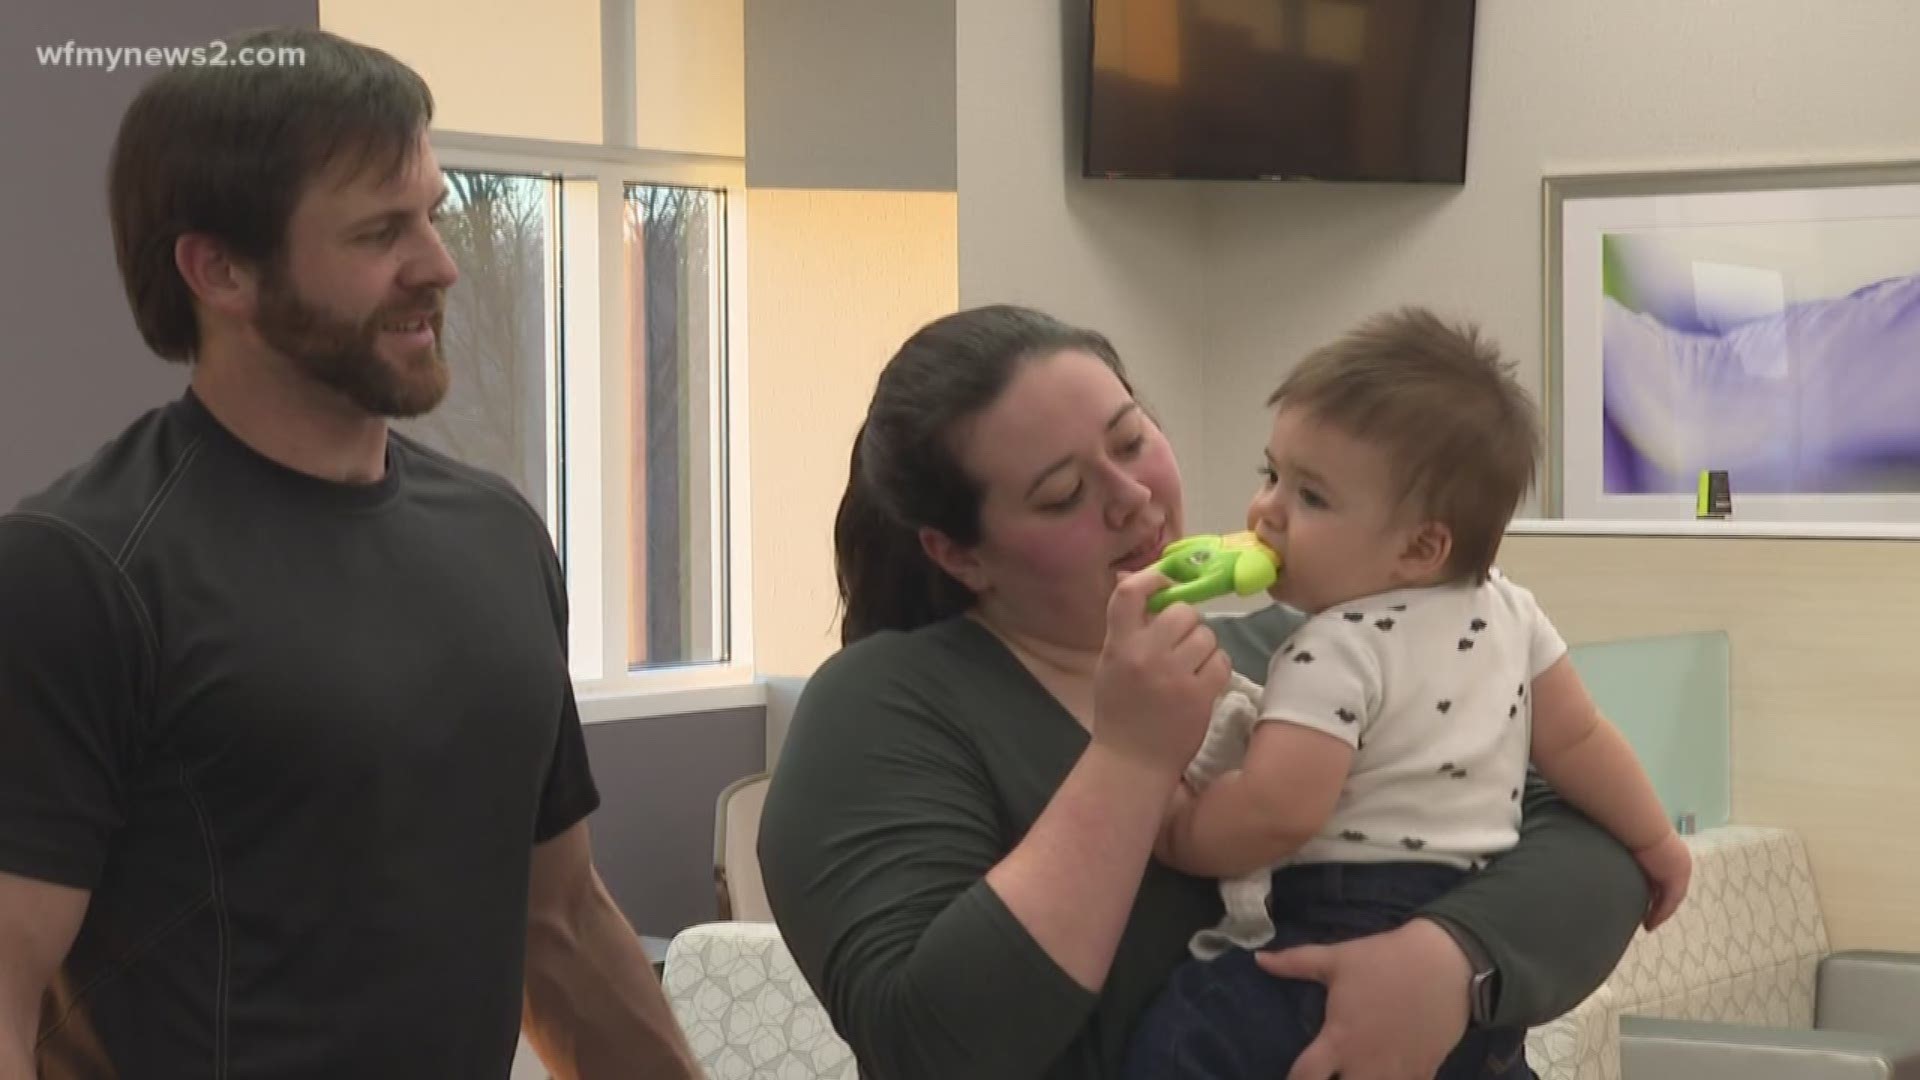 This triad family wanted to bring a child into the world. It wasn't easy, but after many doctor's visits and some hope and prayers, they got their wish.